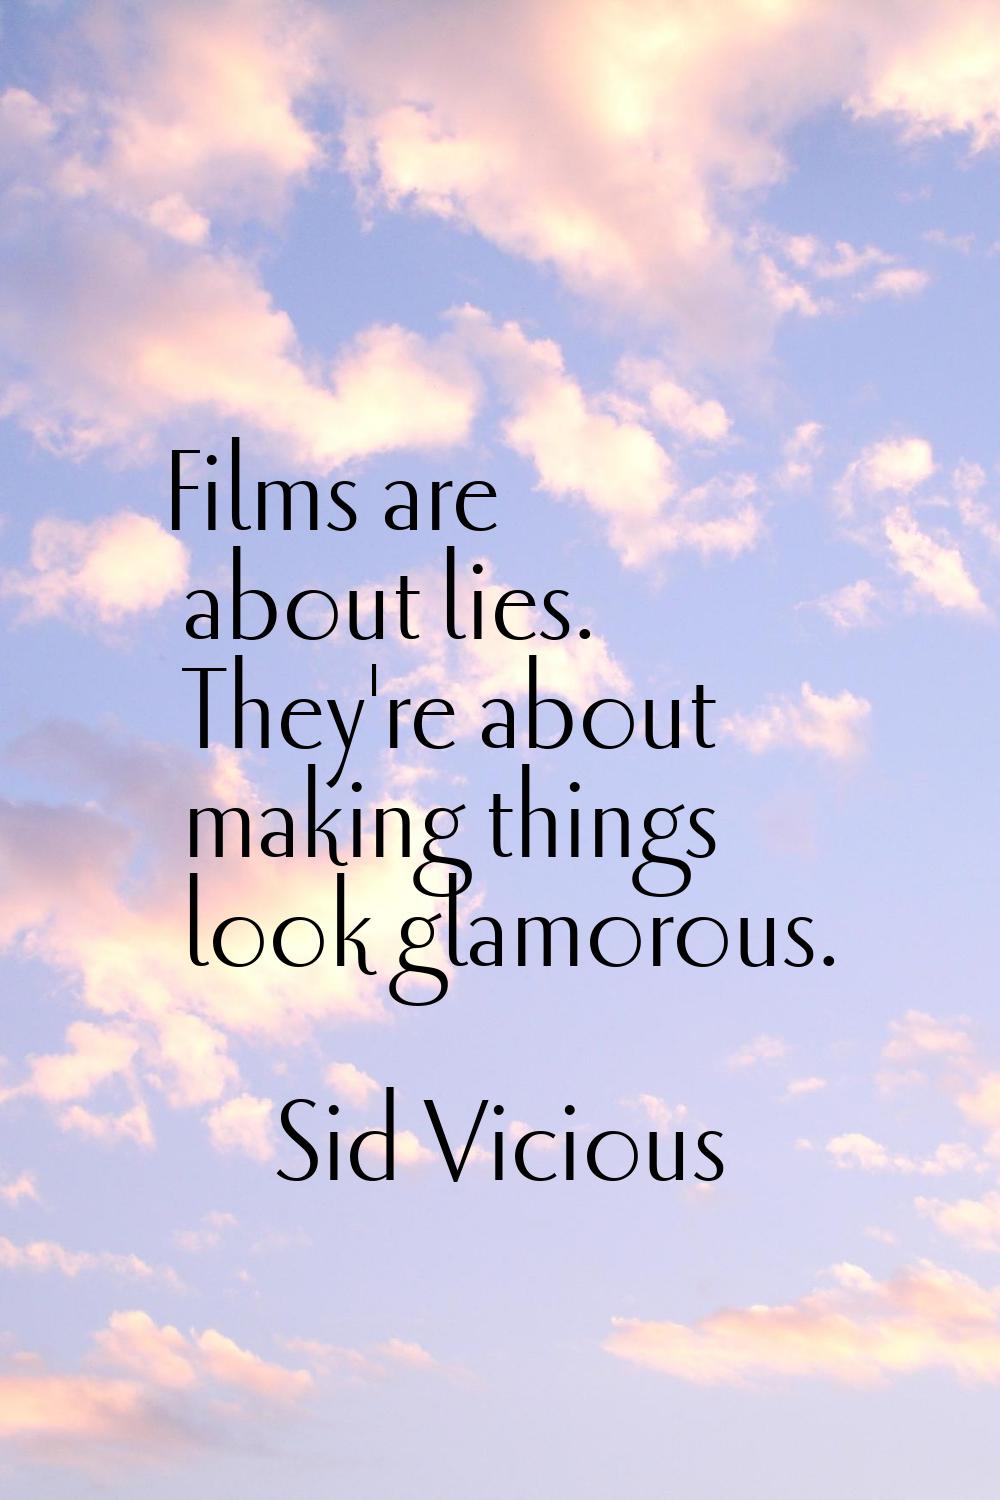 Films are about lies. They're about making things look glamorous.